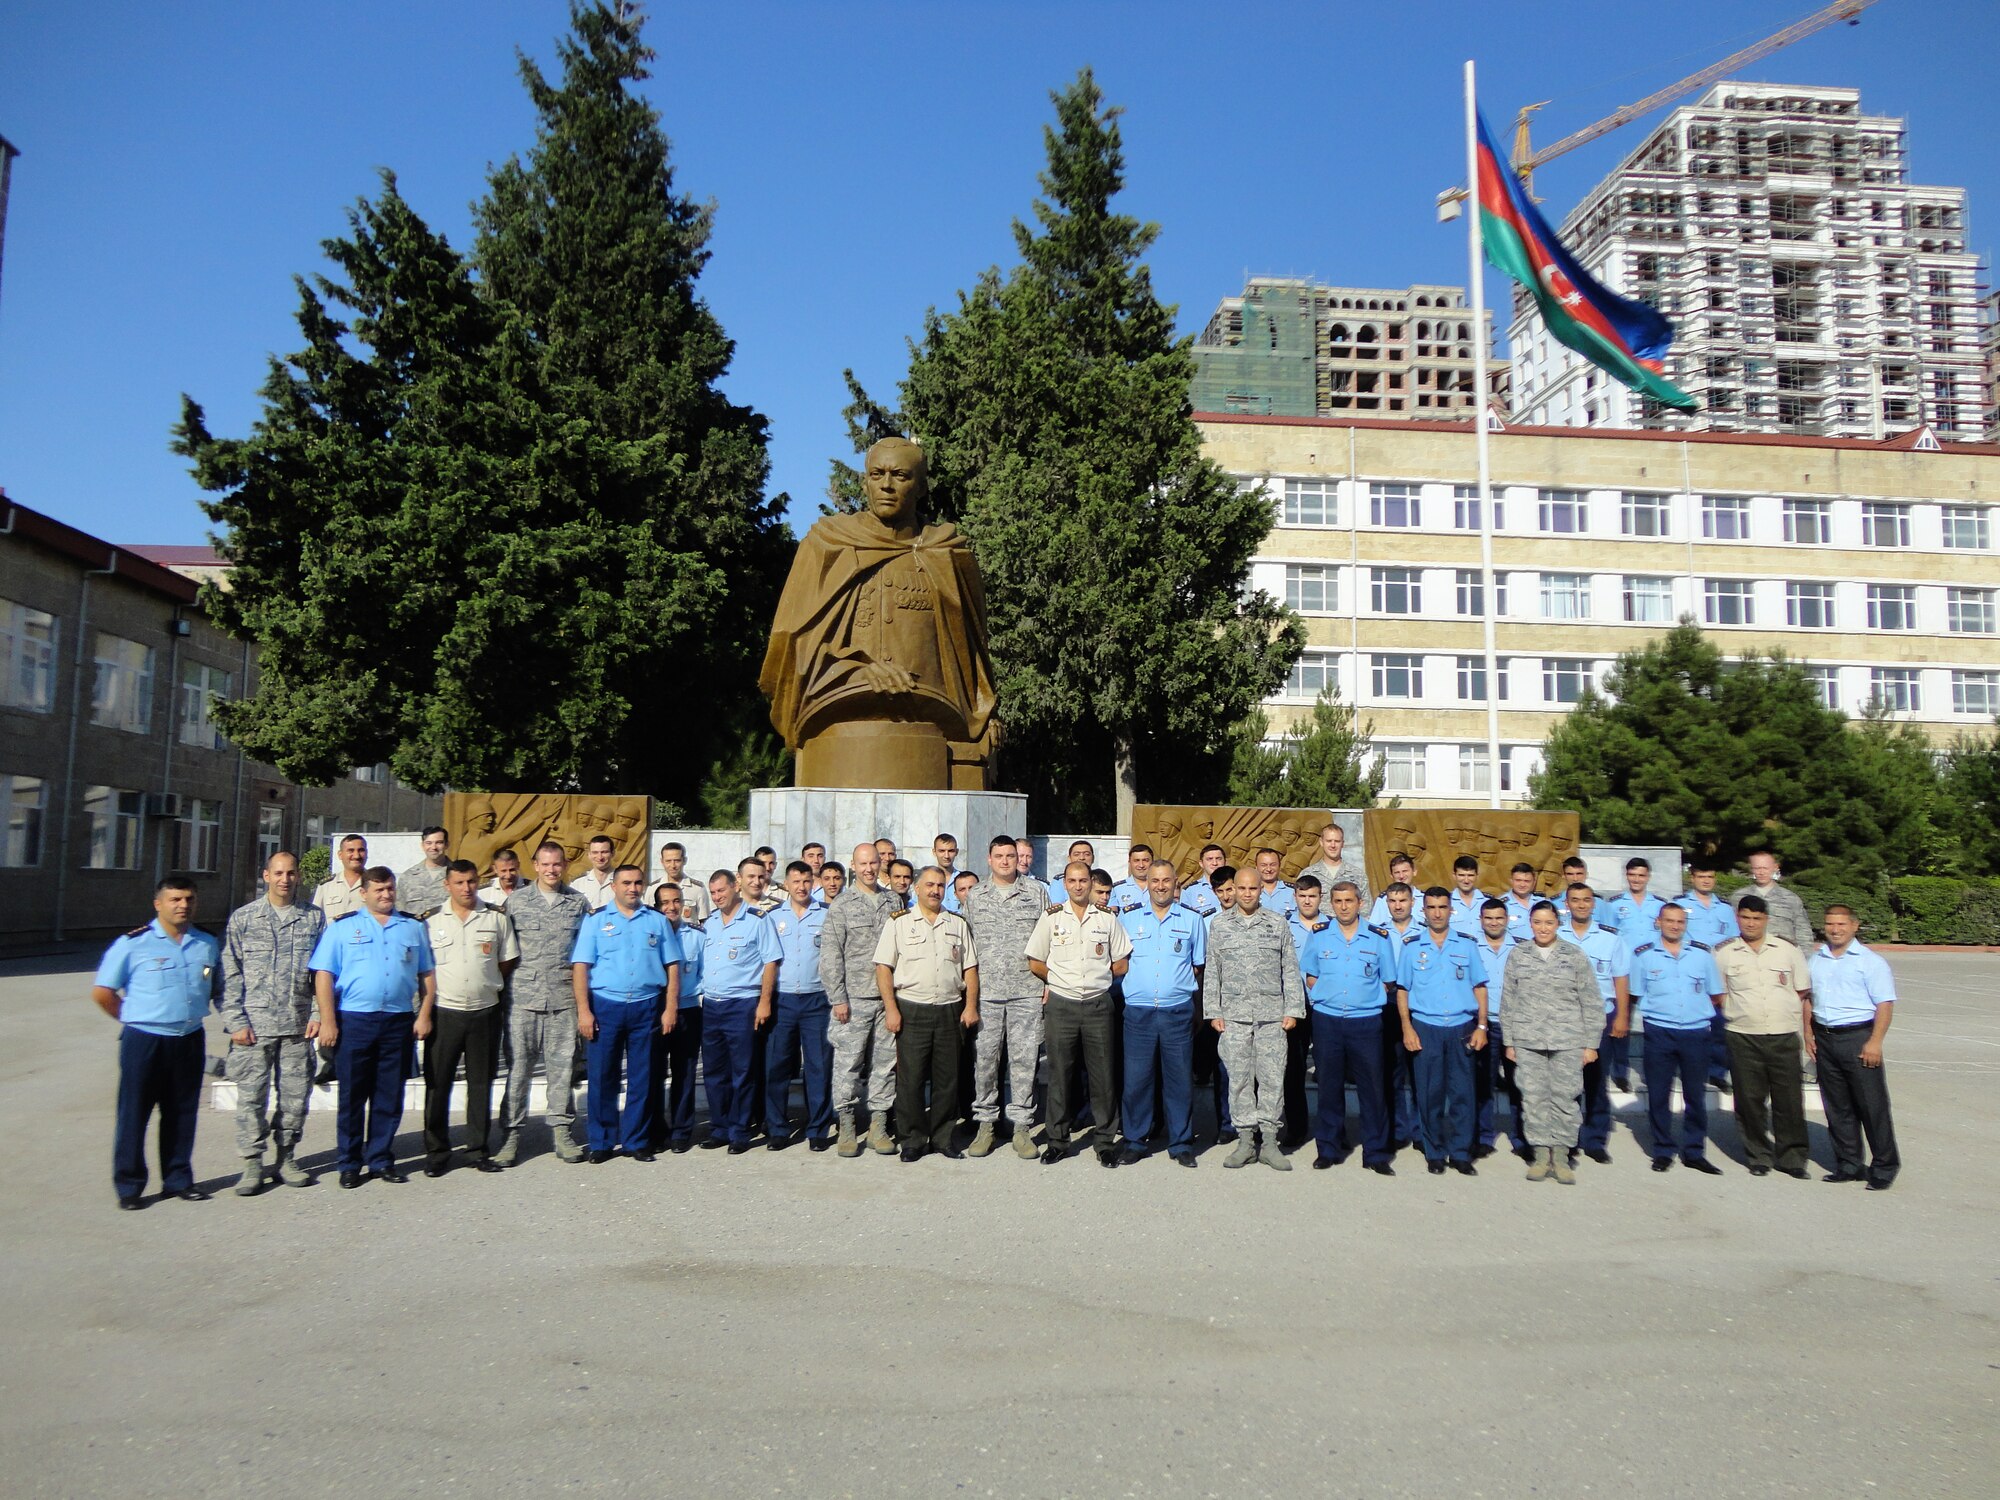 Members of the 435th Contingency Response Group Building Partnership Capacity cell conducted their first initial operating capability mission with Azeri military forces in Azerbaijan Sept. 2 through 8. A traveling contact team of ten journeyed to Baku, Azerbaijan and led an exchange event for airfield management, airspace management, and base communication architecture to aid the Azeris in bolstering their military capability. (U.S. Air Force photo/Staff Sgt. Bryan Carmean)

